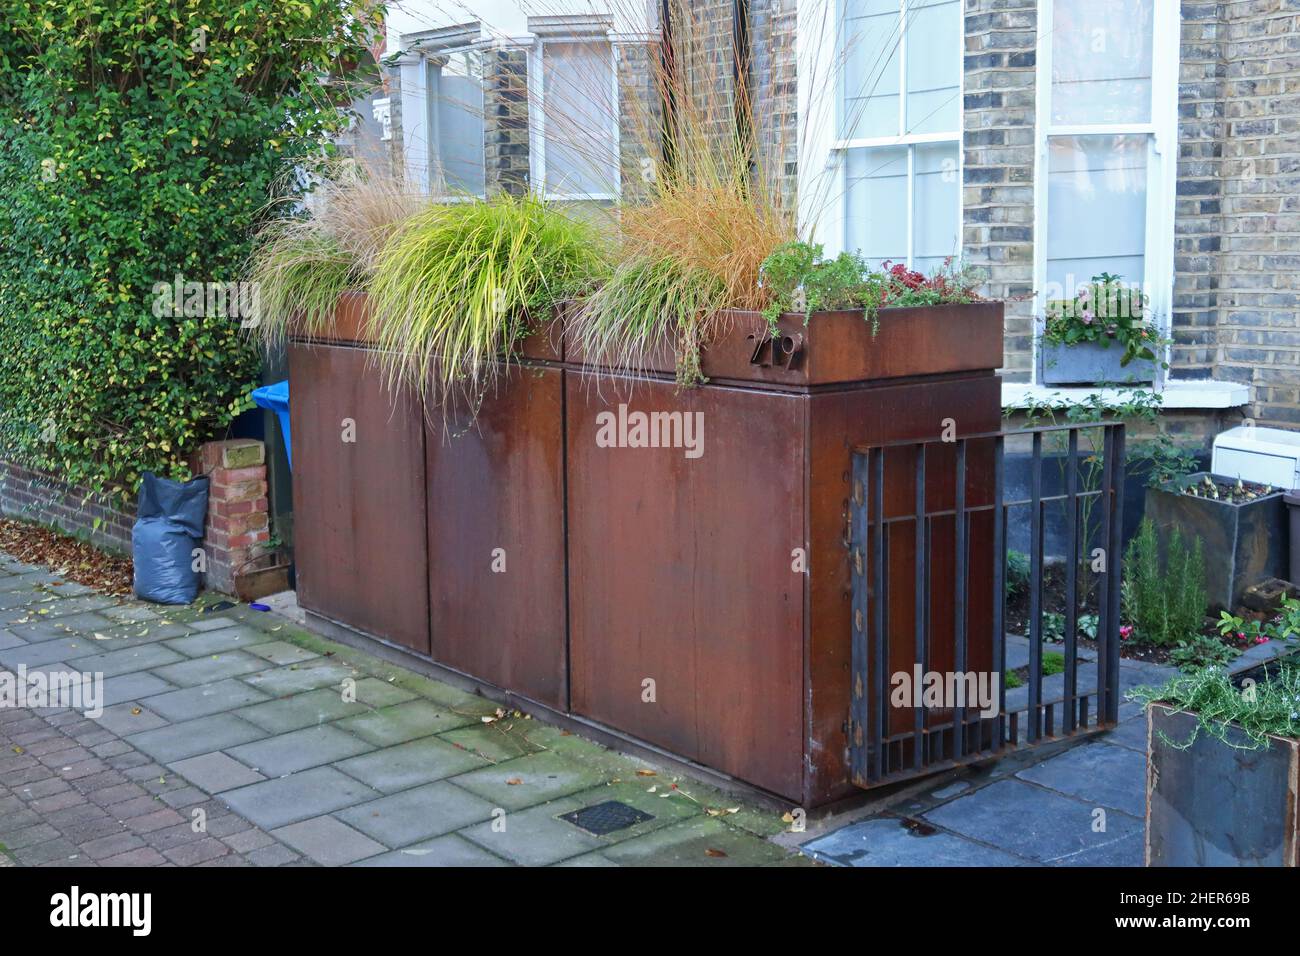 A corten rusty steel wheely-bin store on a Peckham street in London, UK. Houses council refuse bins and features a planting box on top. Stock Photo